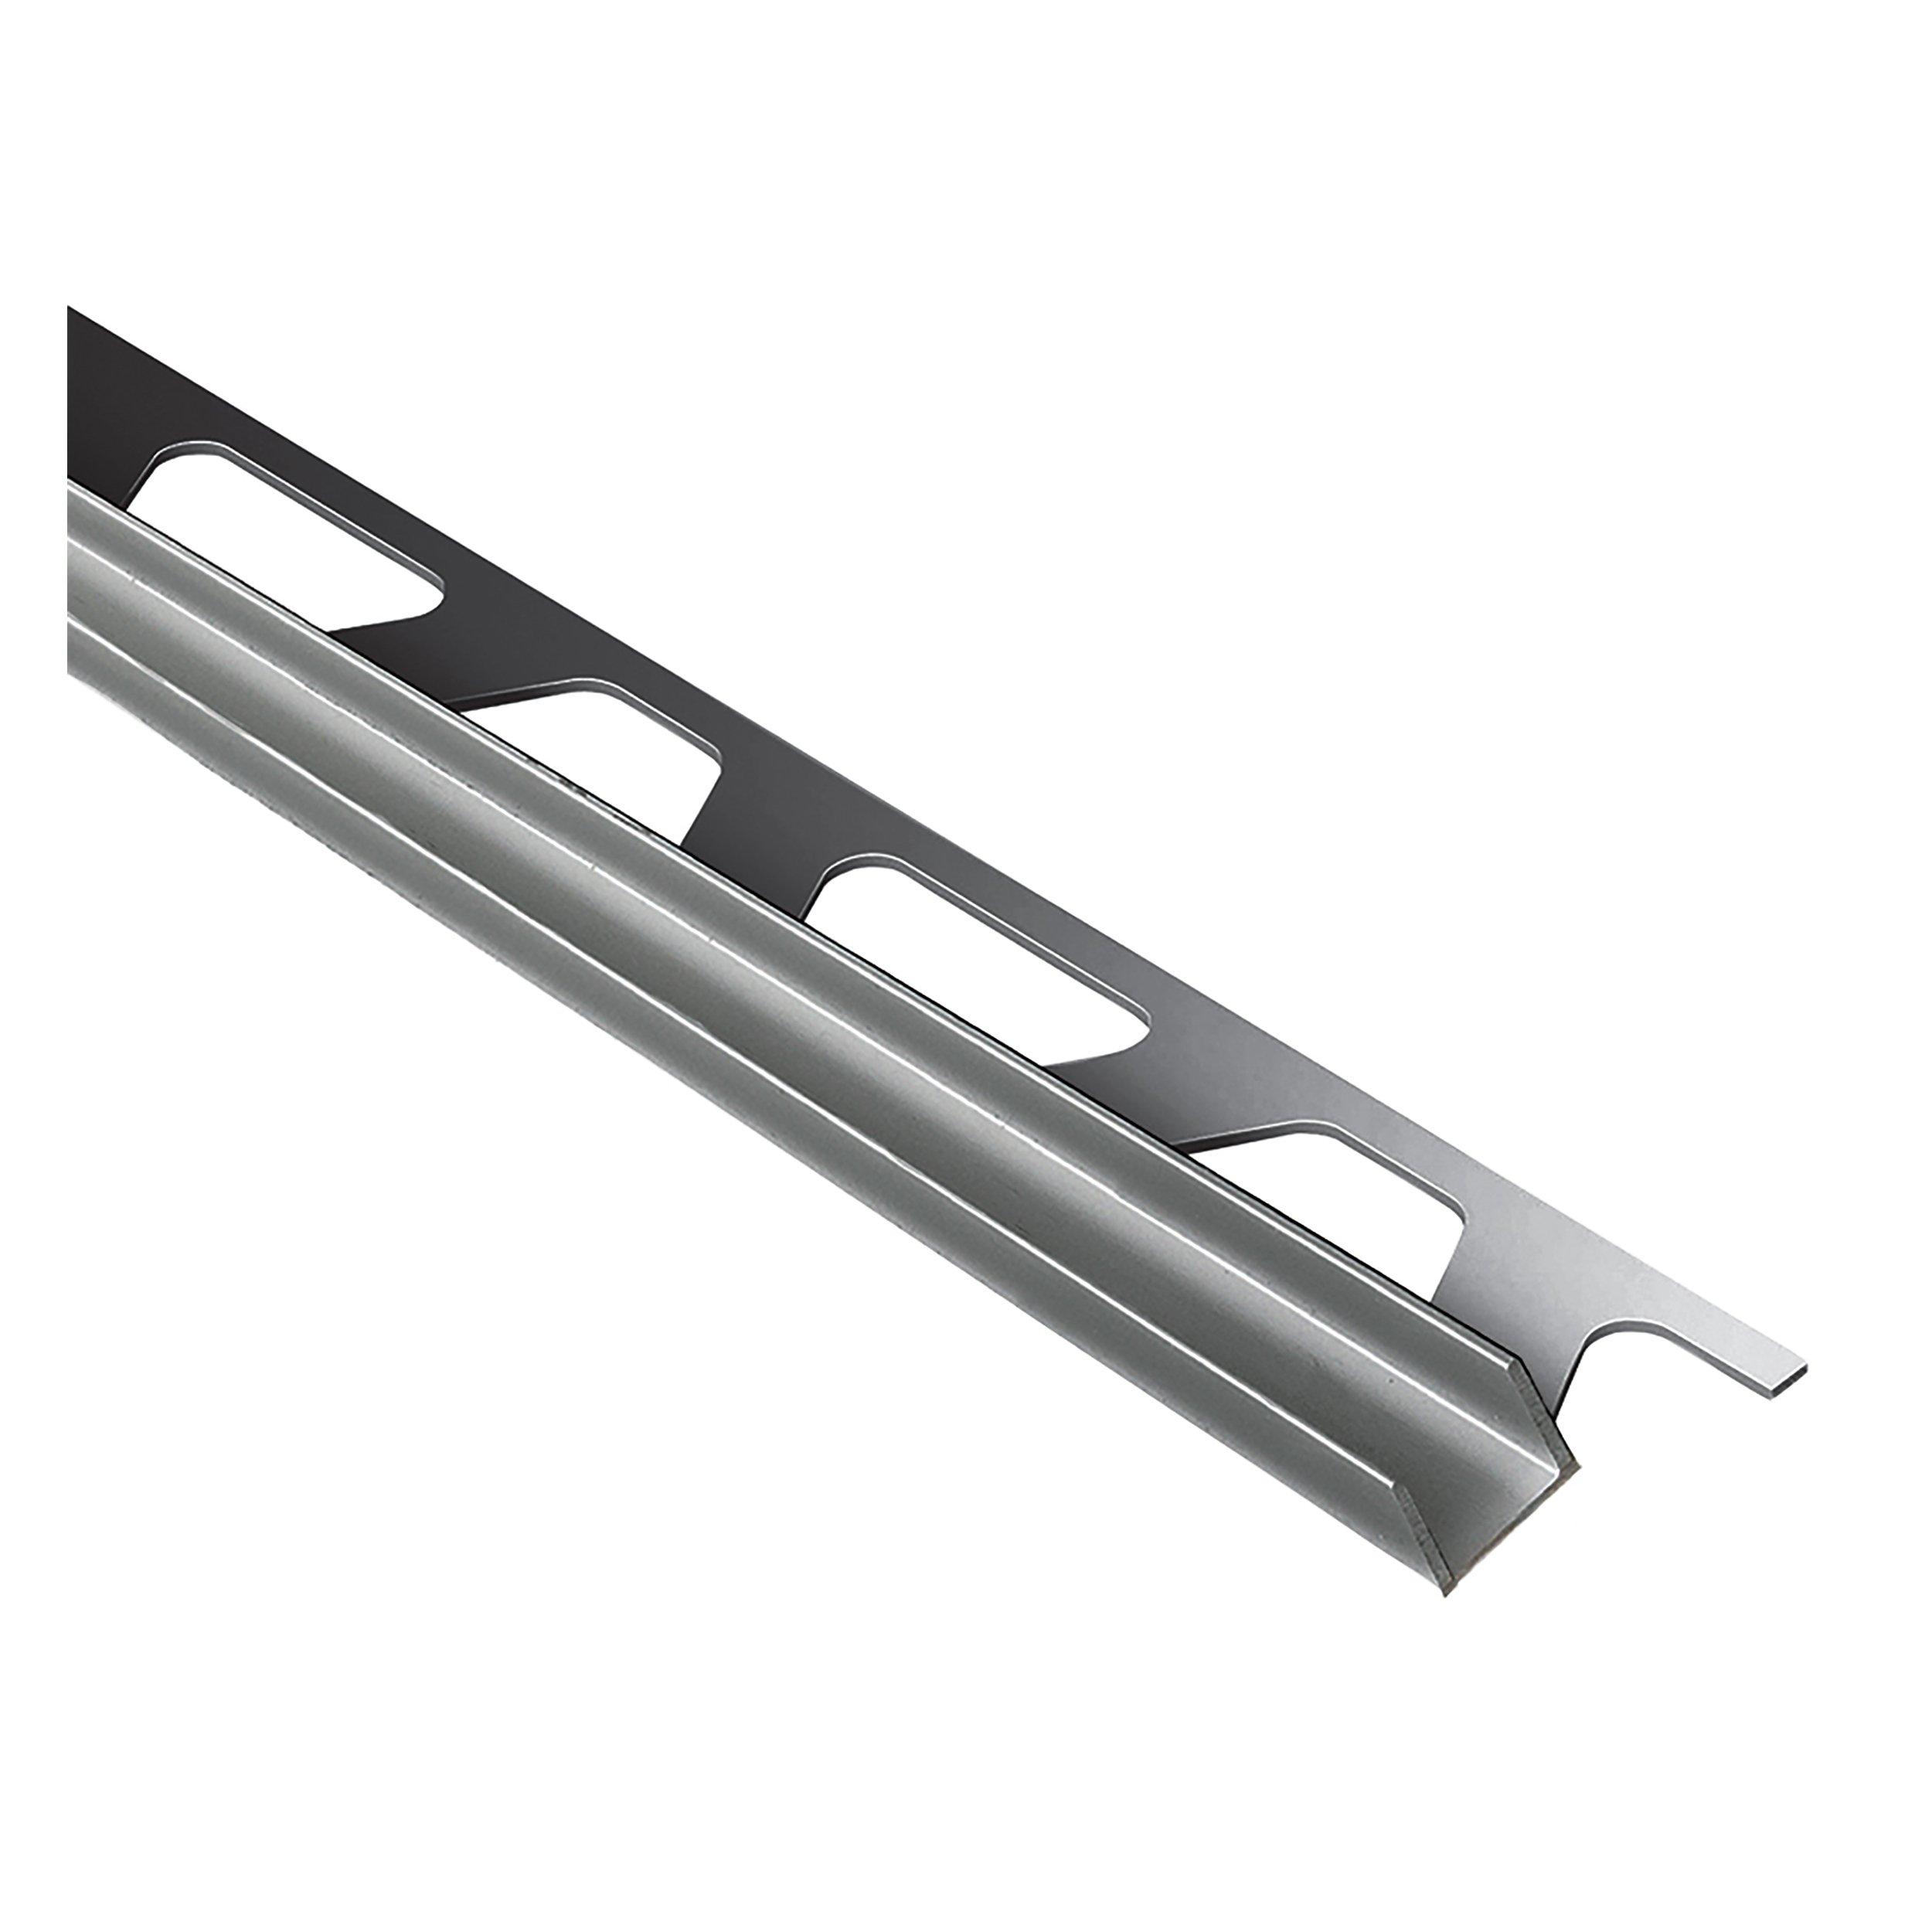 Schluter Deco-Sg 3/8in. Brushed Stainless Steel 15mm